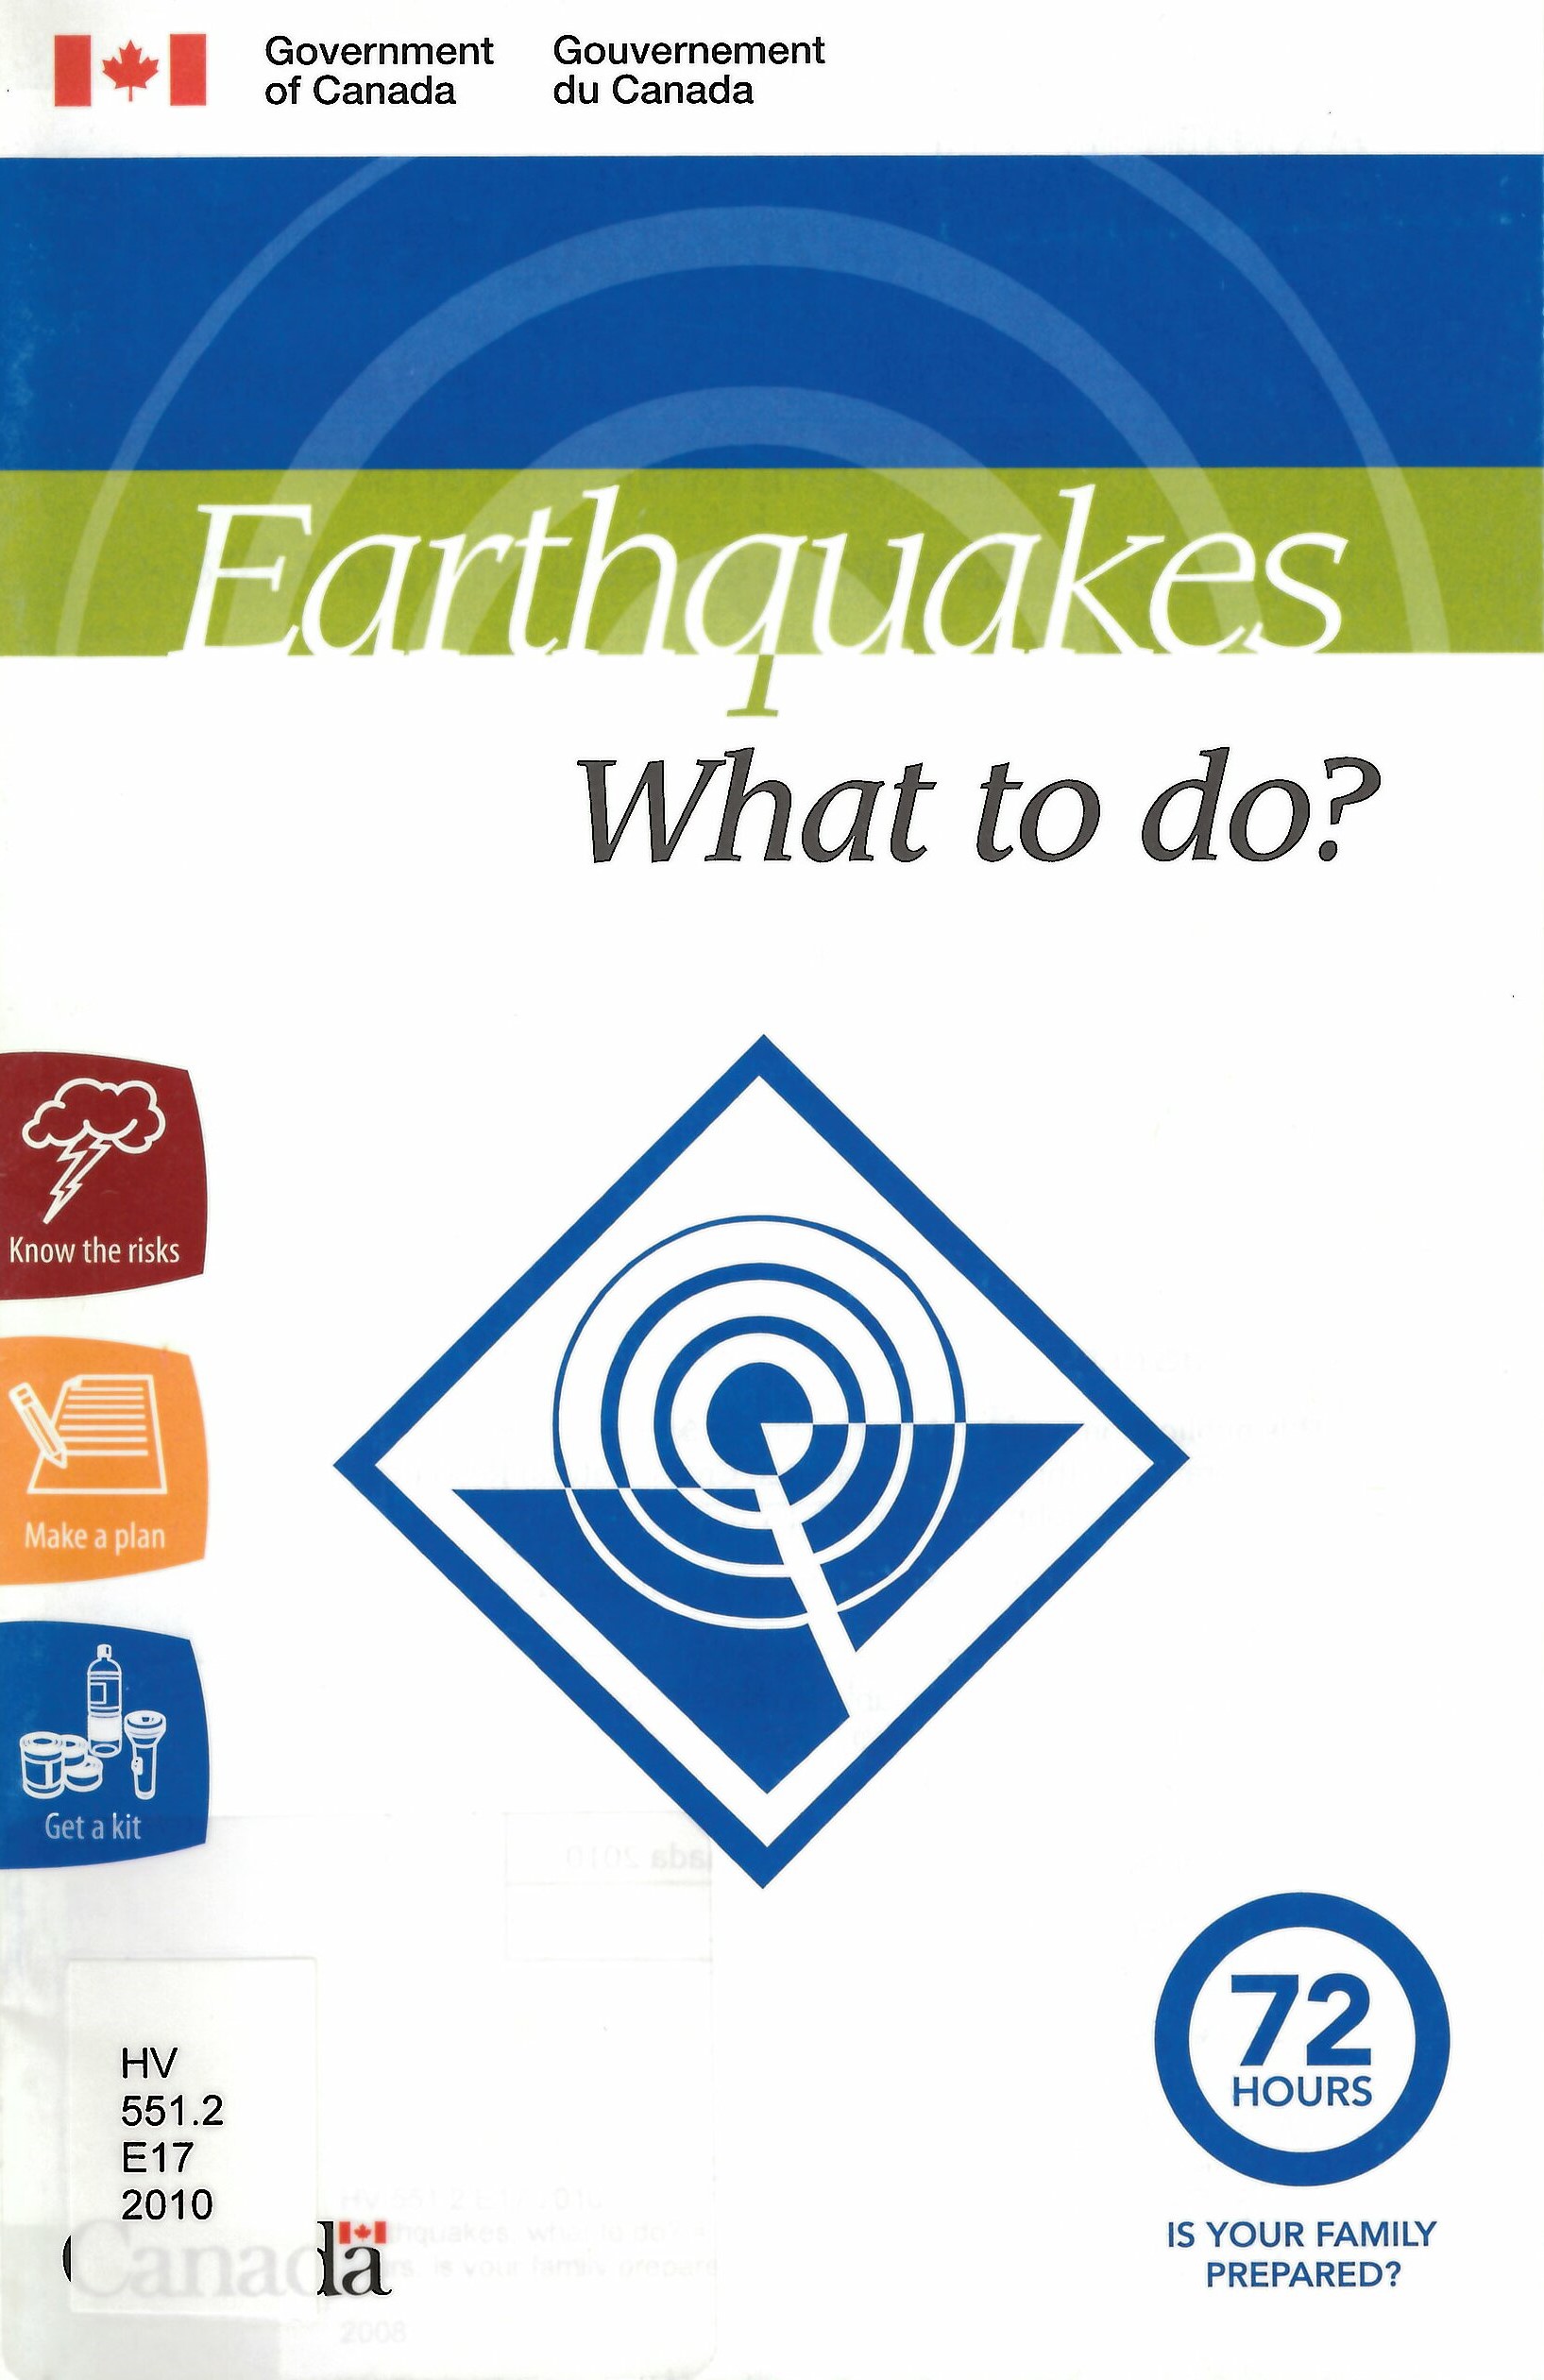 Earthquakes, what to do? = tremblements de terre : 72 hours, is your family prepared?